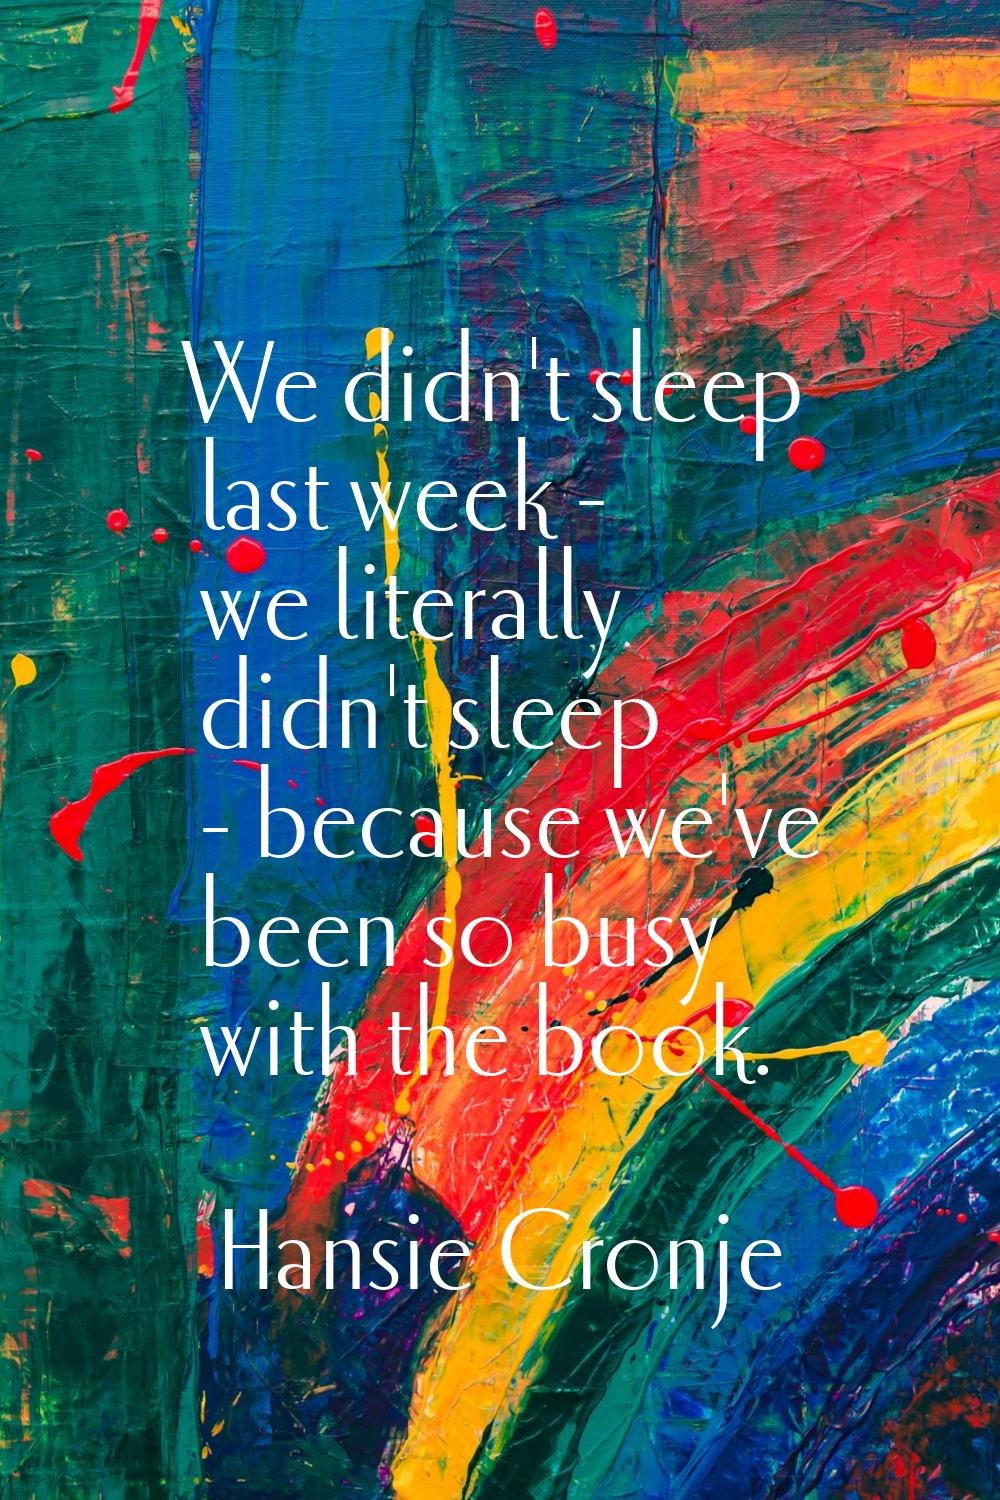 We didn't sleep last week - we literally didn't sleep - because we've been so busy with the book.